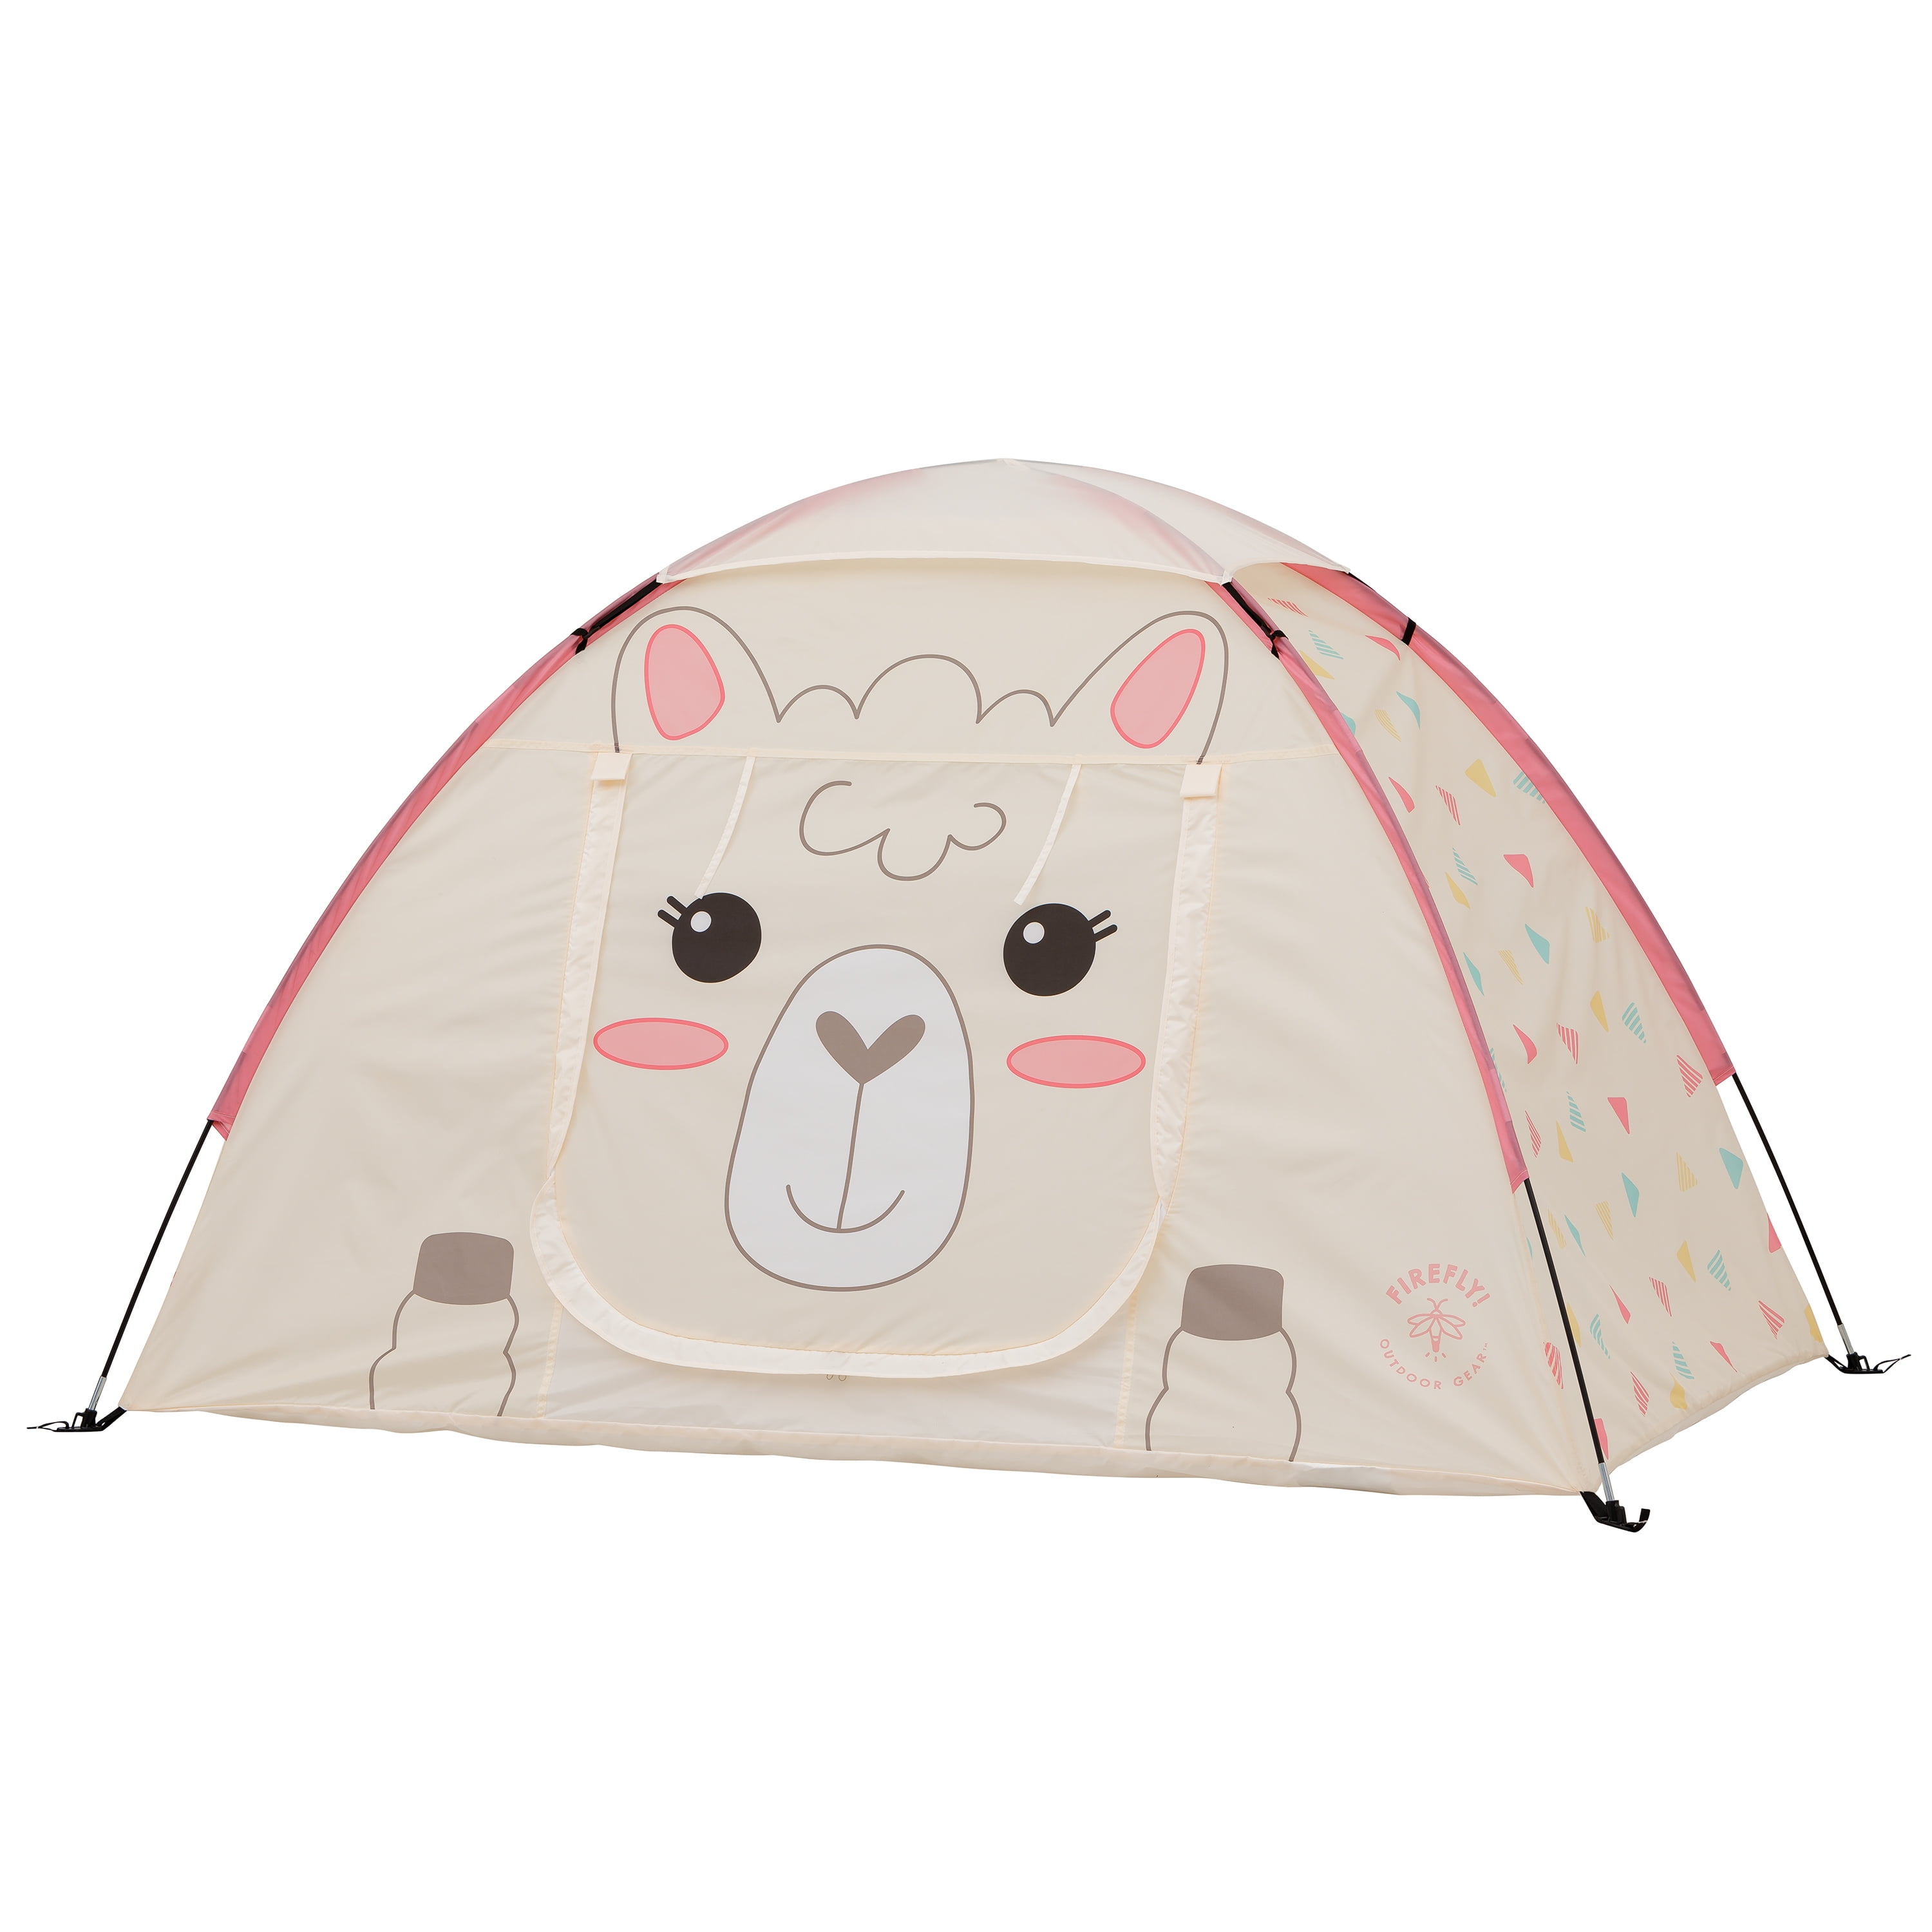 Gear　Off-white/Pink　Tent　Room　Izzie　the　Firefly!　2-Person　Kid's　Camping　Outdoor　One　Llama　Color,